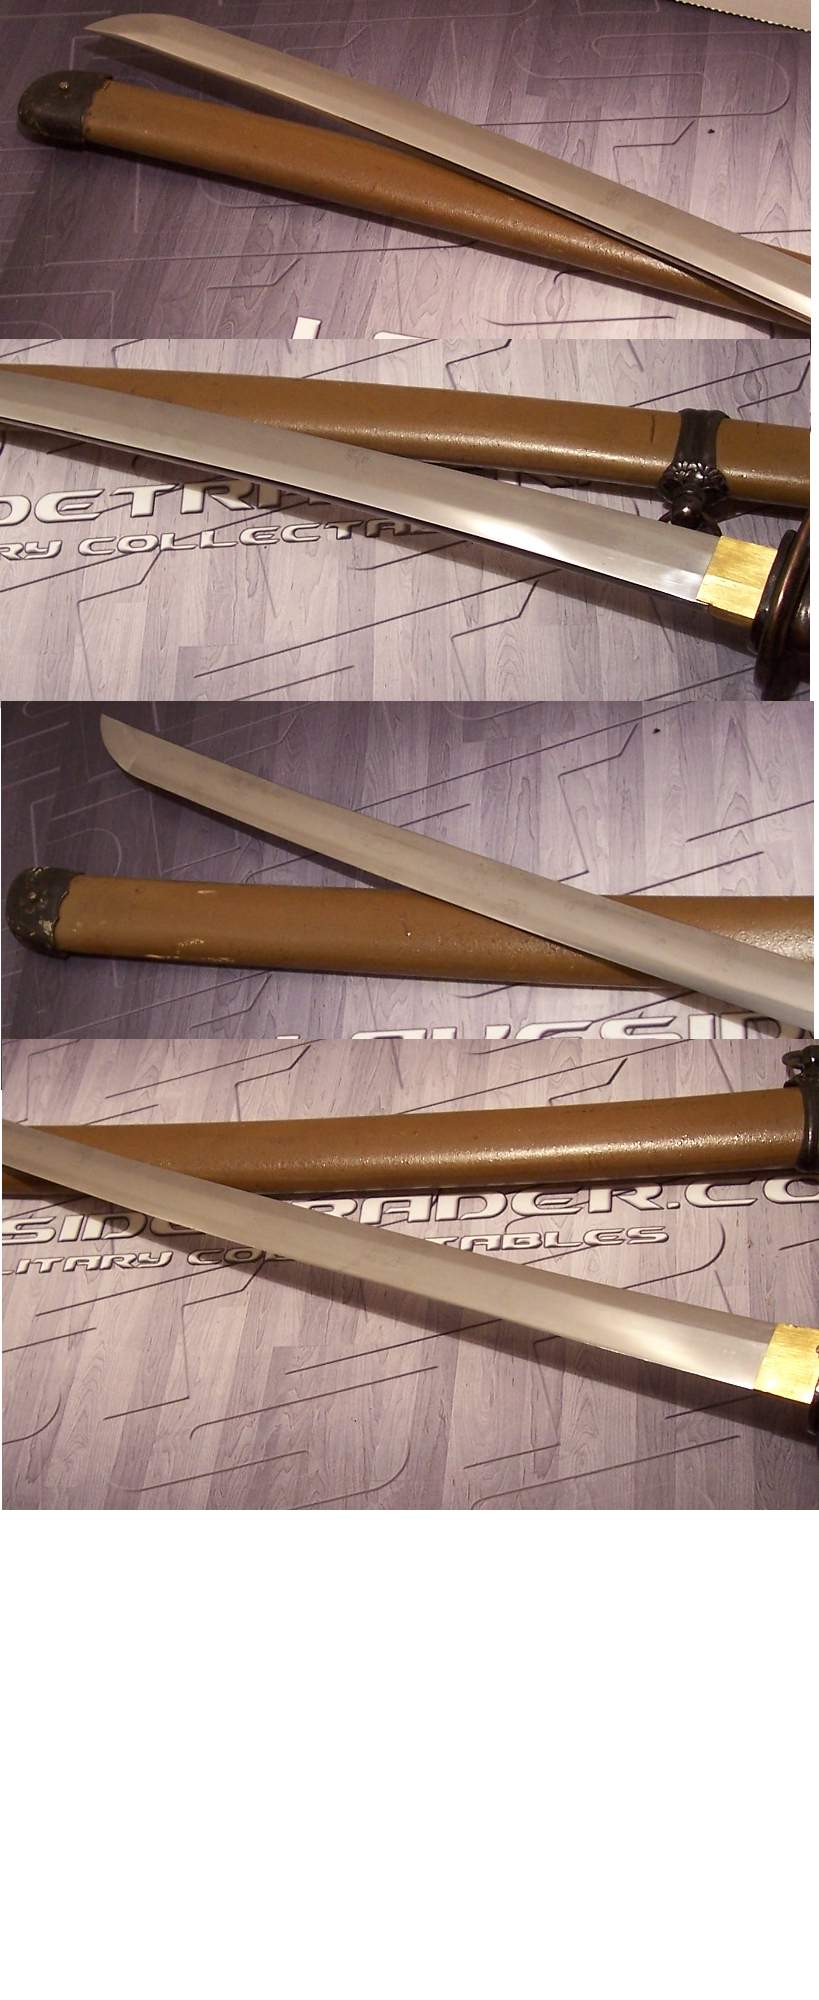 Japanese Type 3 Army Officer Sword